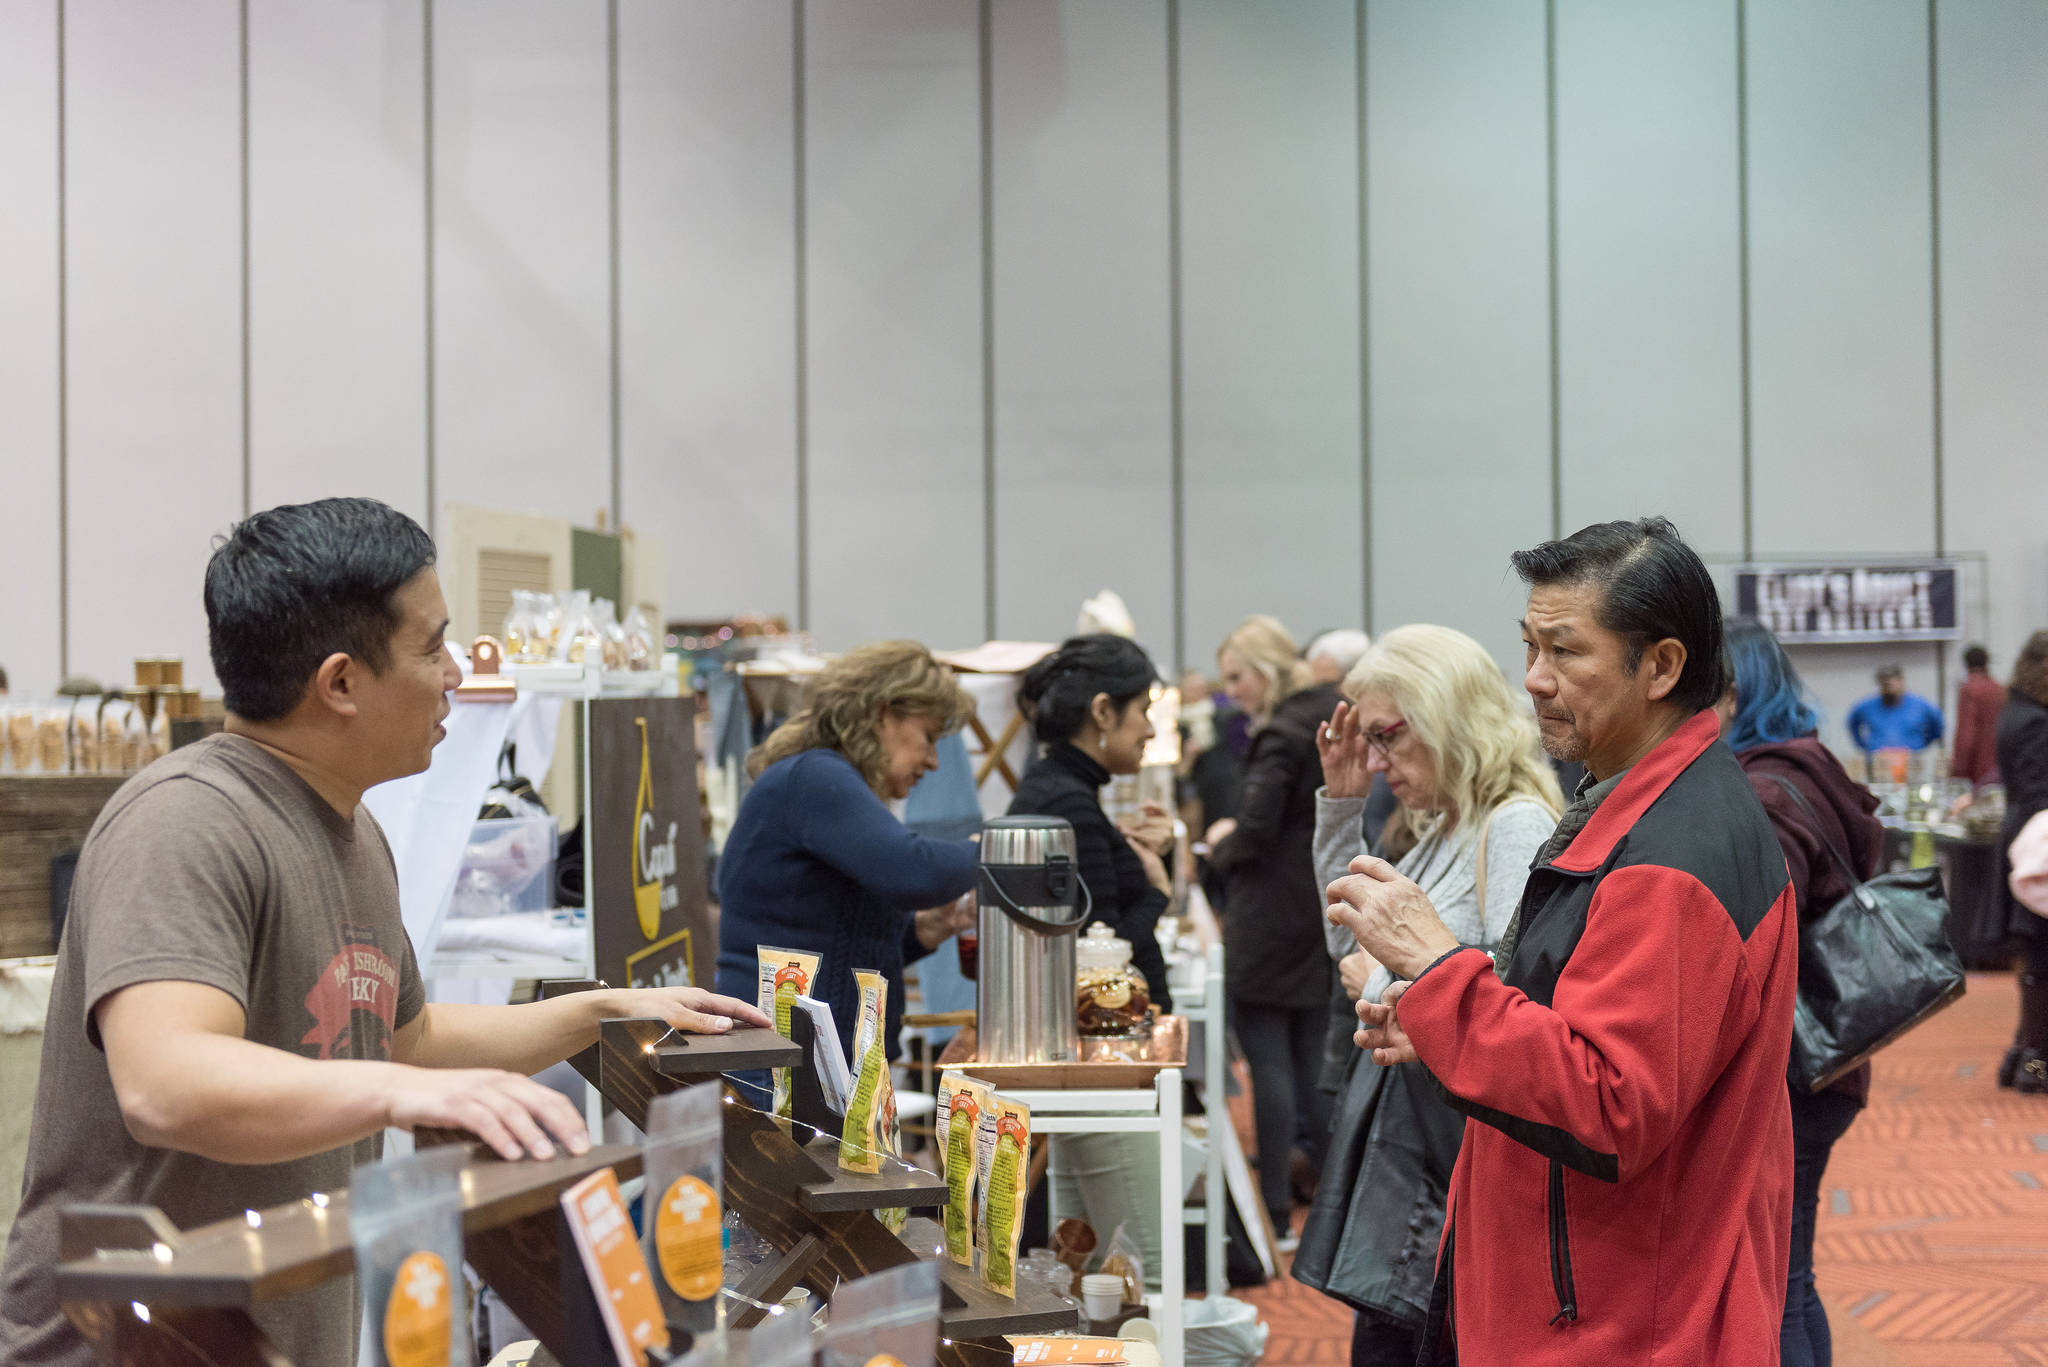 Gobble Up brings local food crafters together to show off their wares. Photo by Lydia Brewer